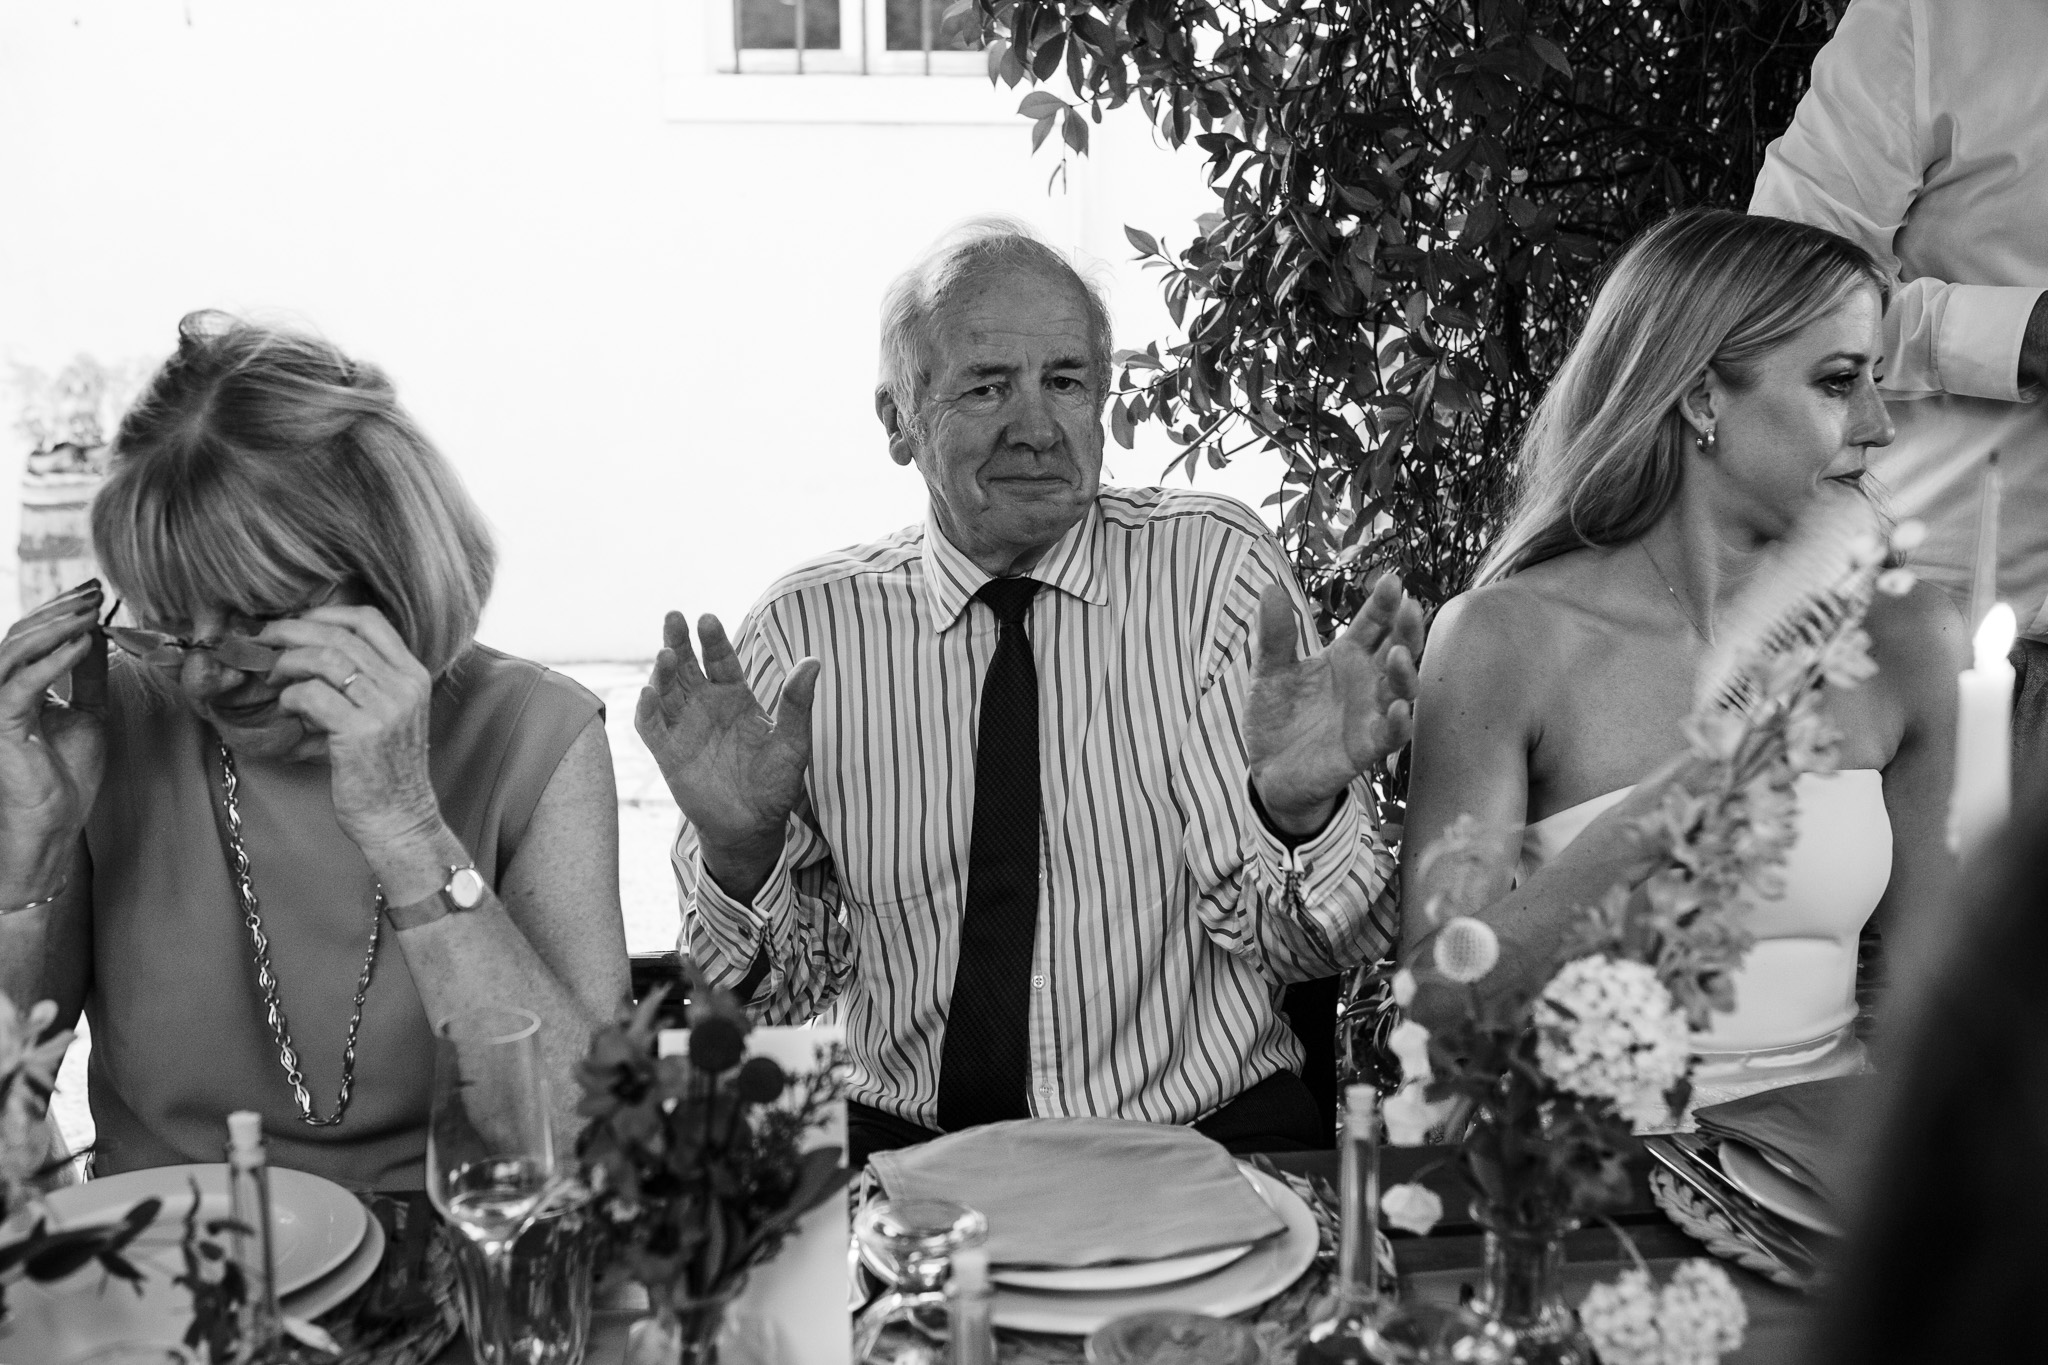 Father of the bride raises his hands as he sits between the bride and his wife at a wedding dinner